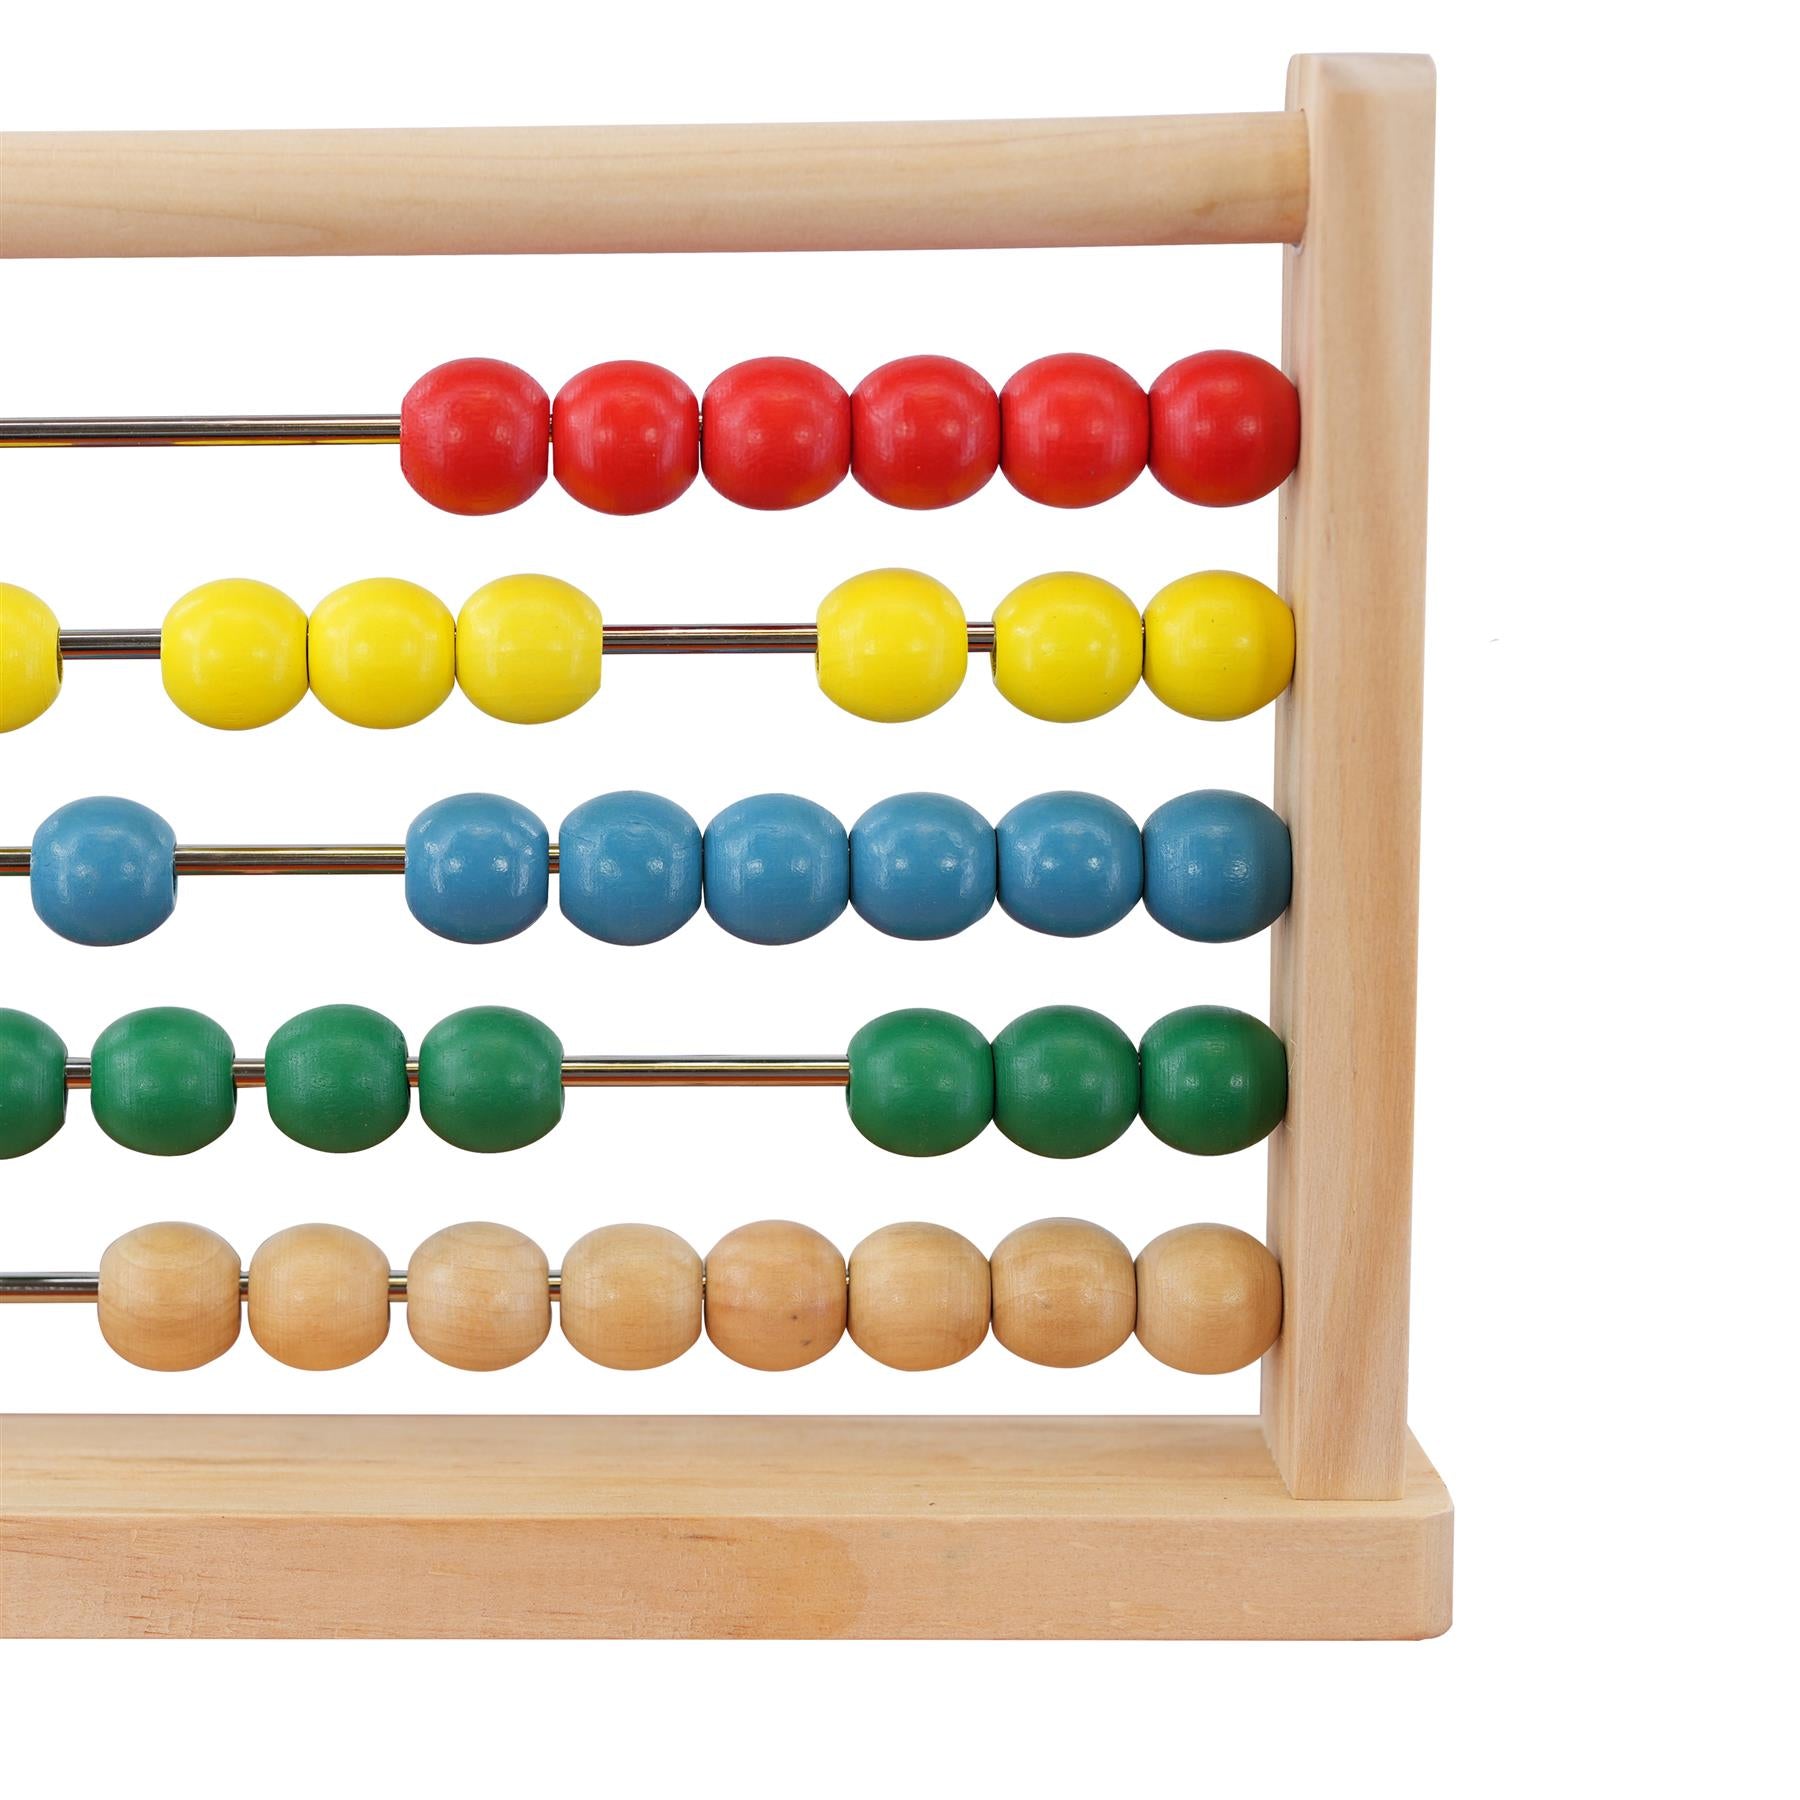 Large Sturdy Wooden Abacus by The Magic Toy Shop - UKBuyZone